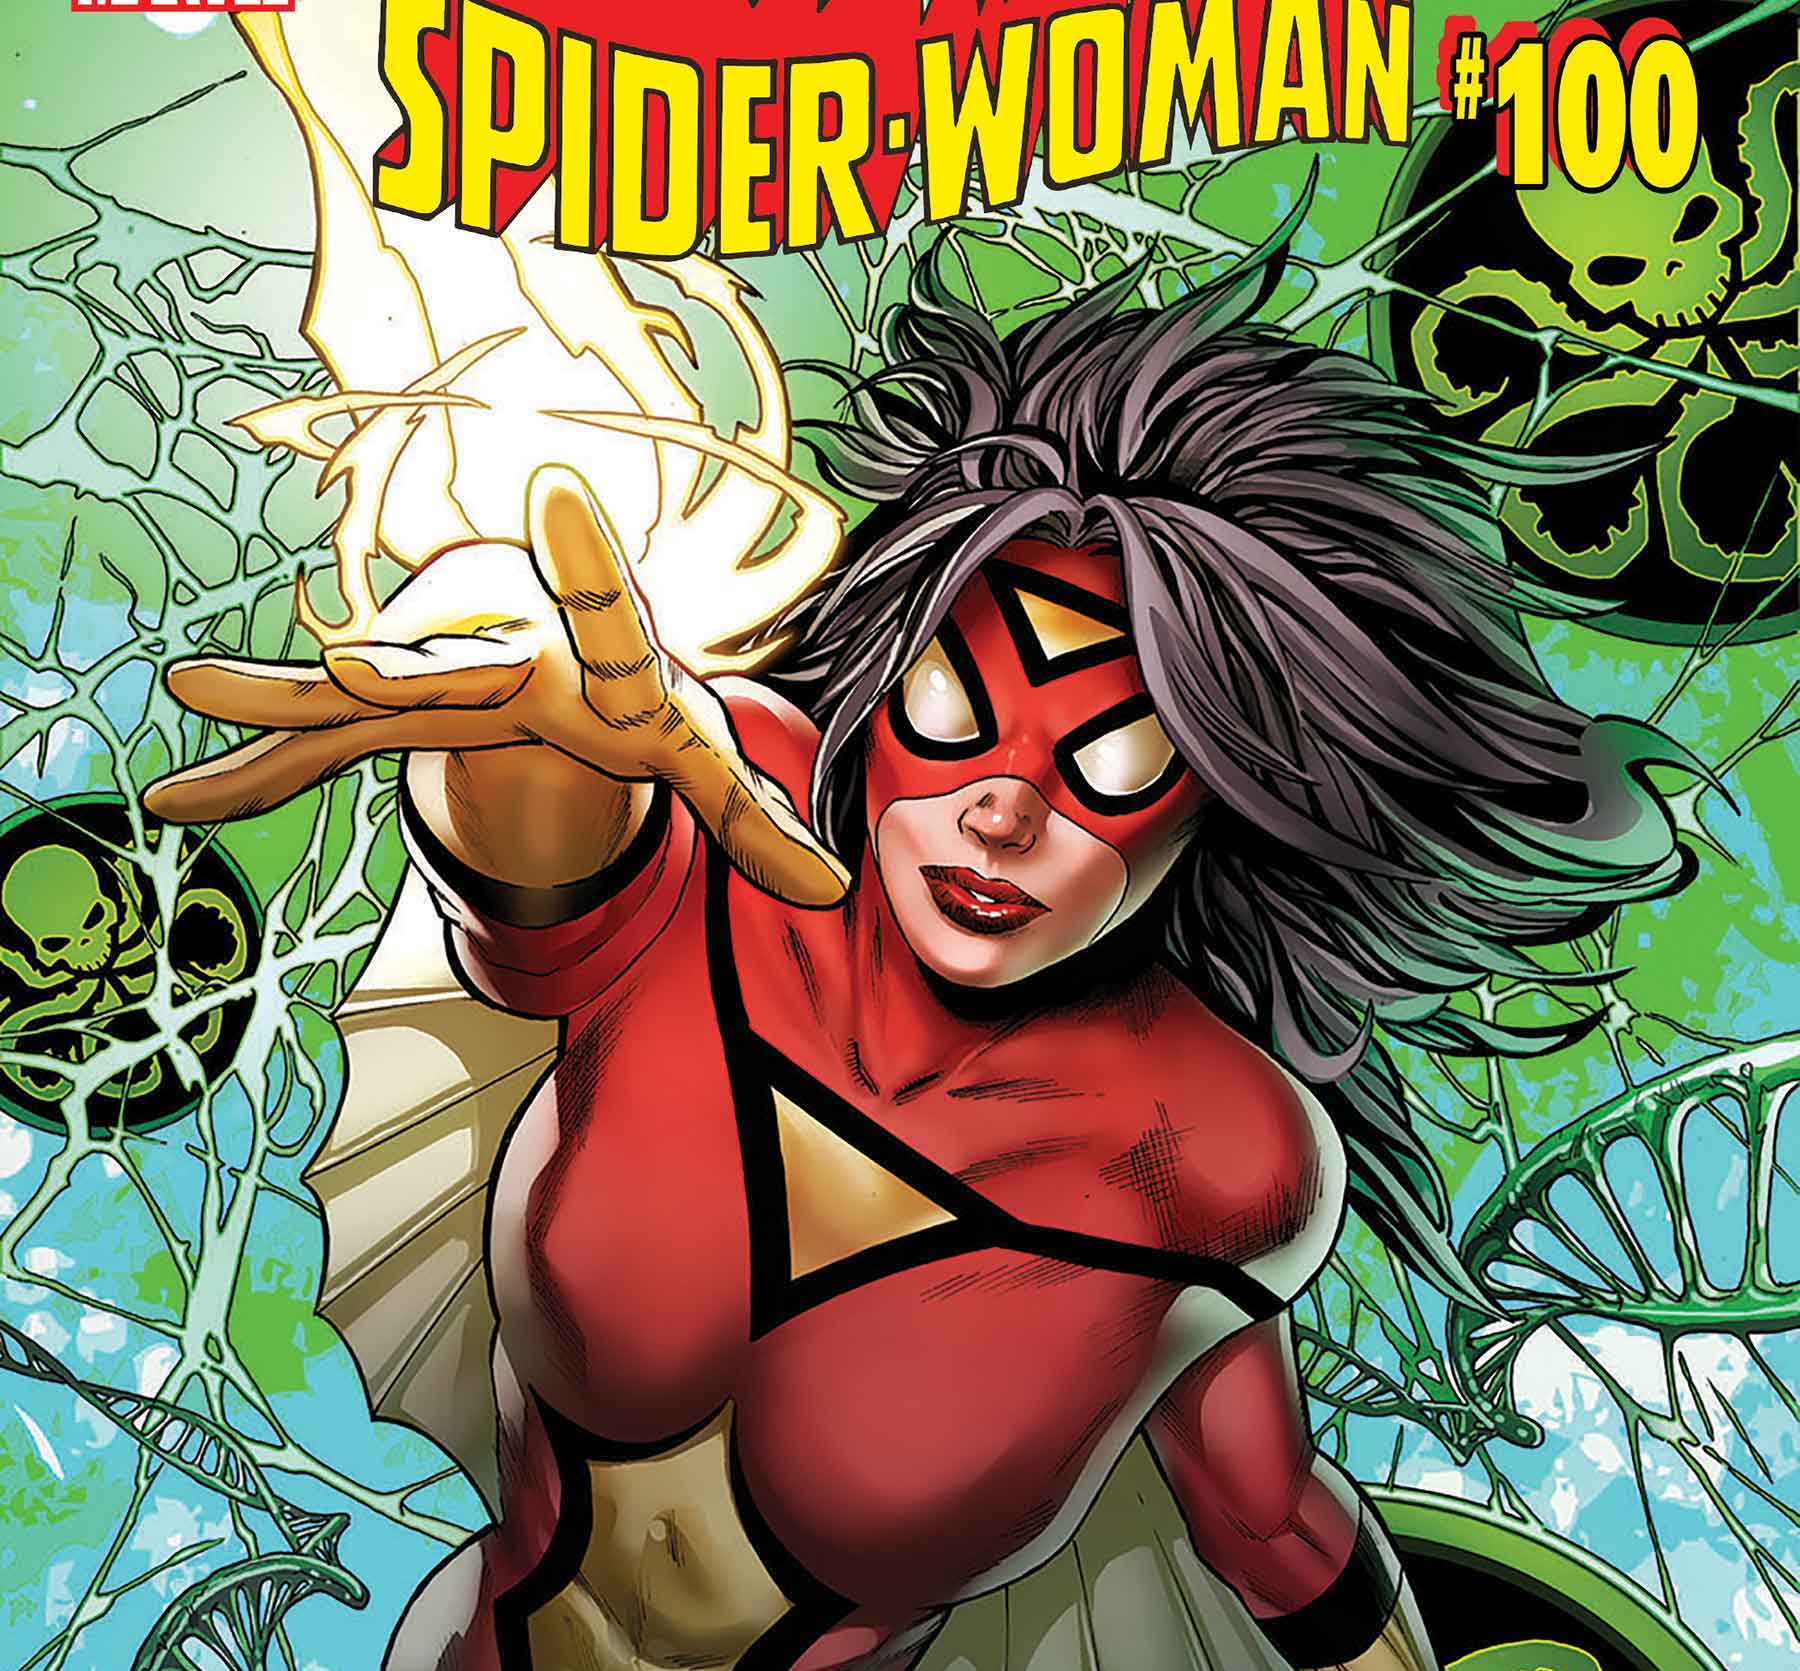 Spider-Woman hits its 100th issue with 'Spider-Woman' #5